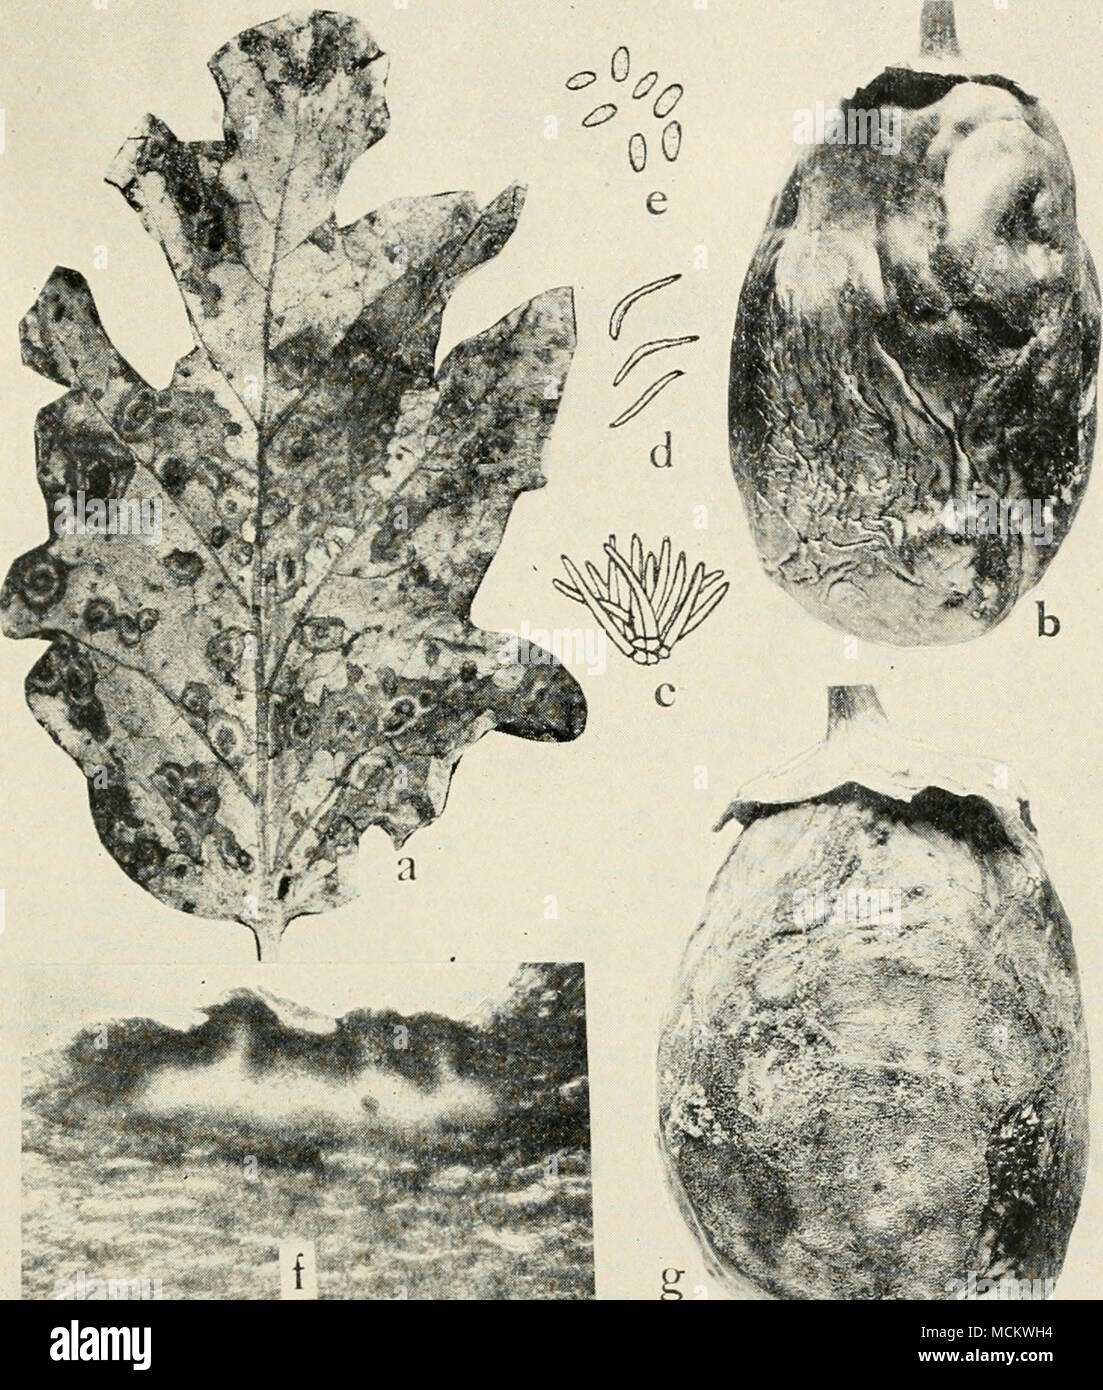 . Fig. 56. Egg-Plant Diseases. a. Phomopsis of leaf, 6. Phomopsis on fruit, c. conidiophores, rf. stylospores, e. pycnospores of Phomopsis vexans, f. photomicrograph of a cross section through an infected calyx of an egg plant showing pycnidia of P. vexans (c. to f. after Harter), g.. anthracnose on egg-plant fruit. Stock Photo